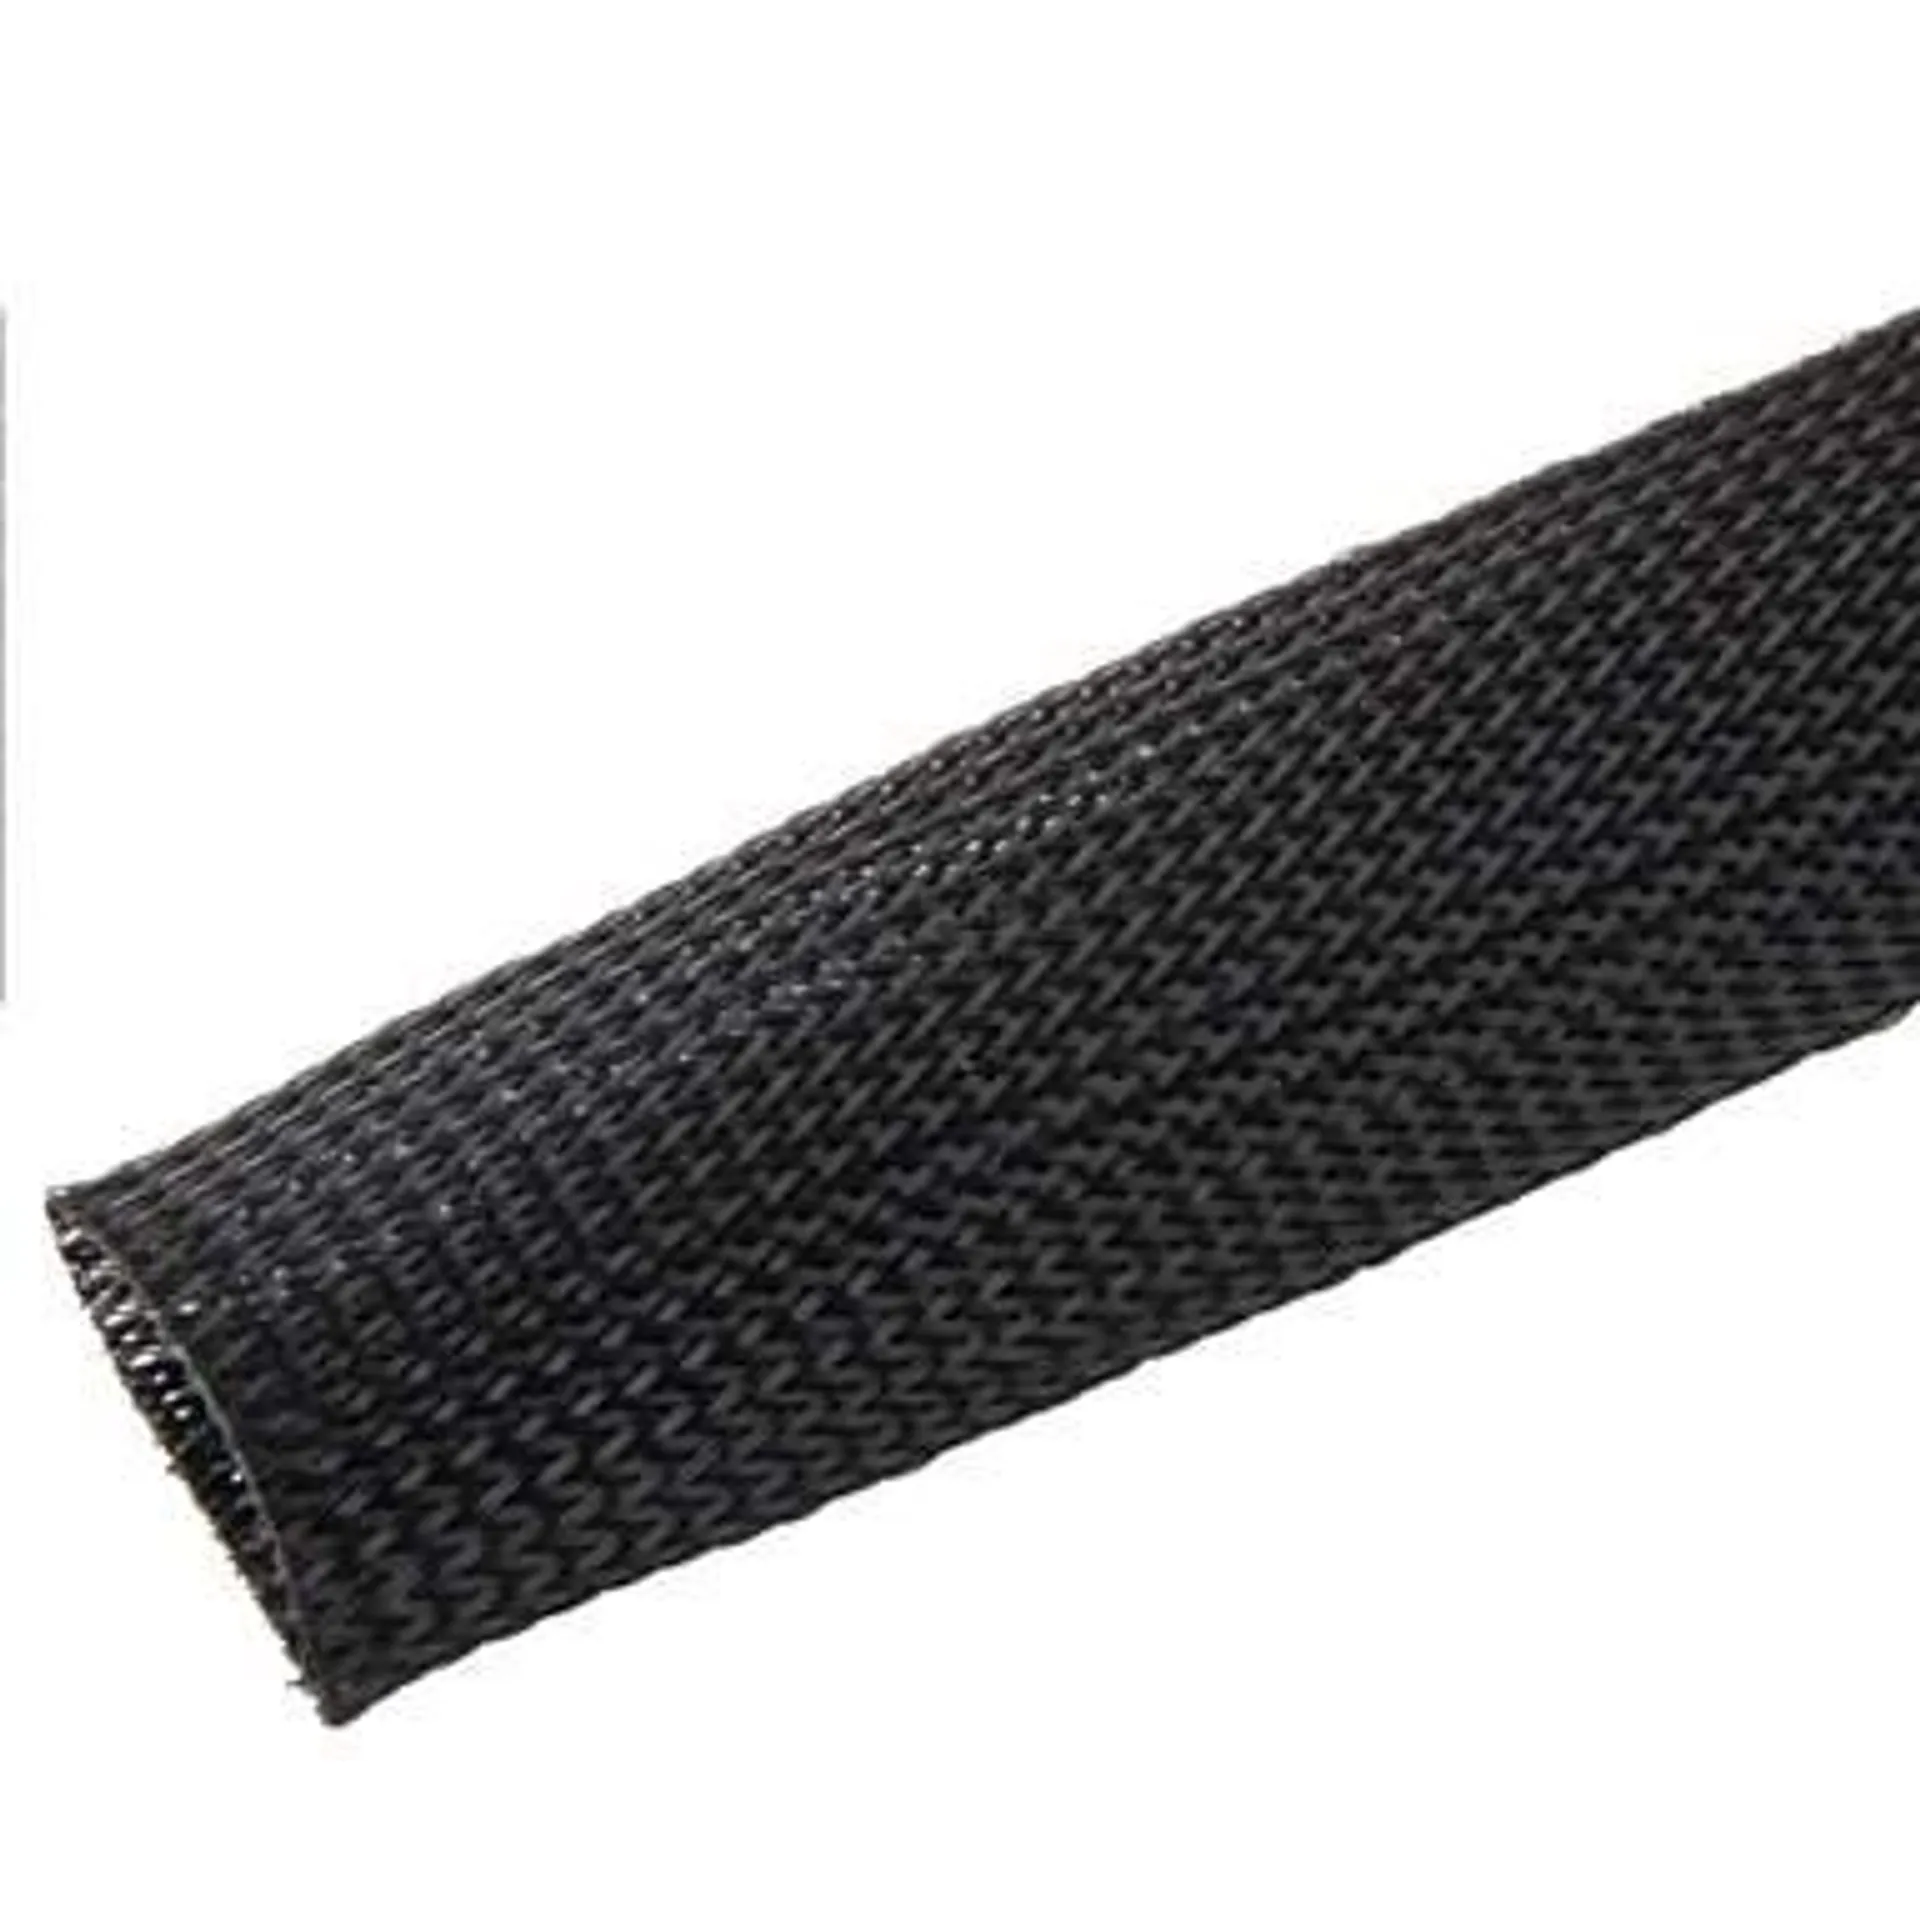 Connexs 28 to 47mm Expandable Black Braided Sleeving (Pack of 25m)